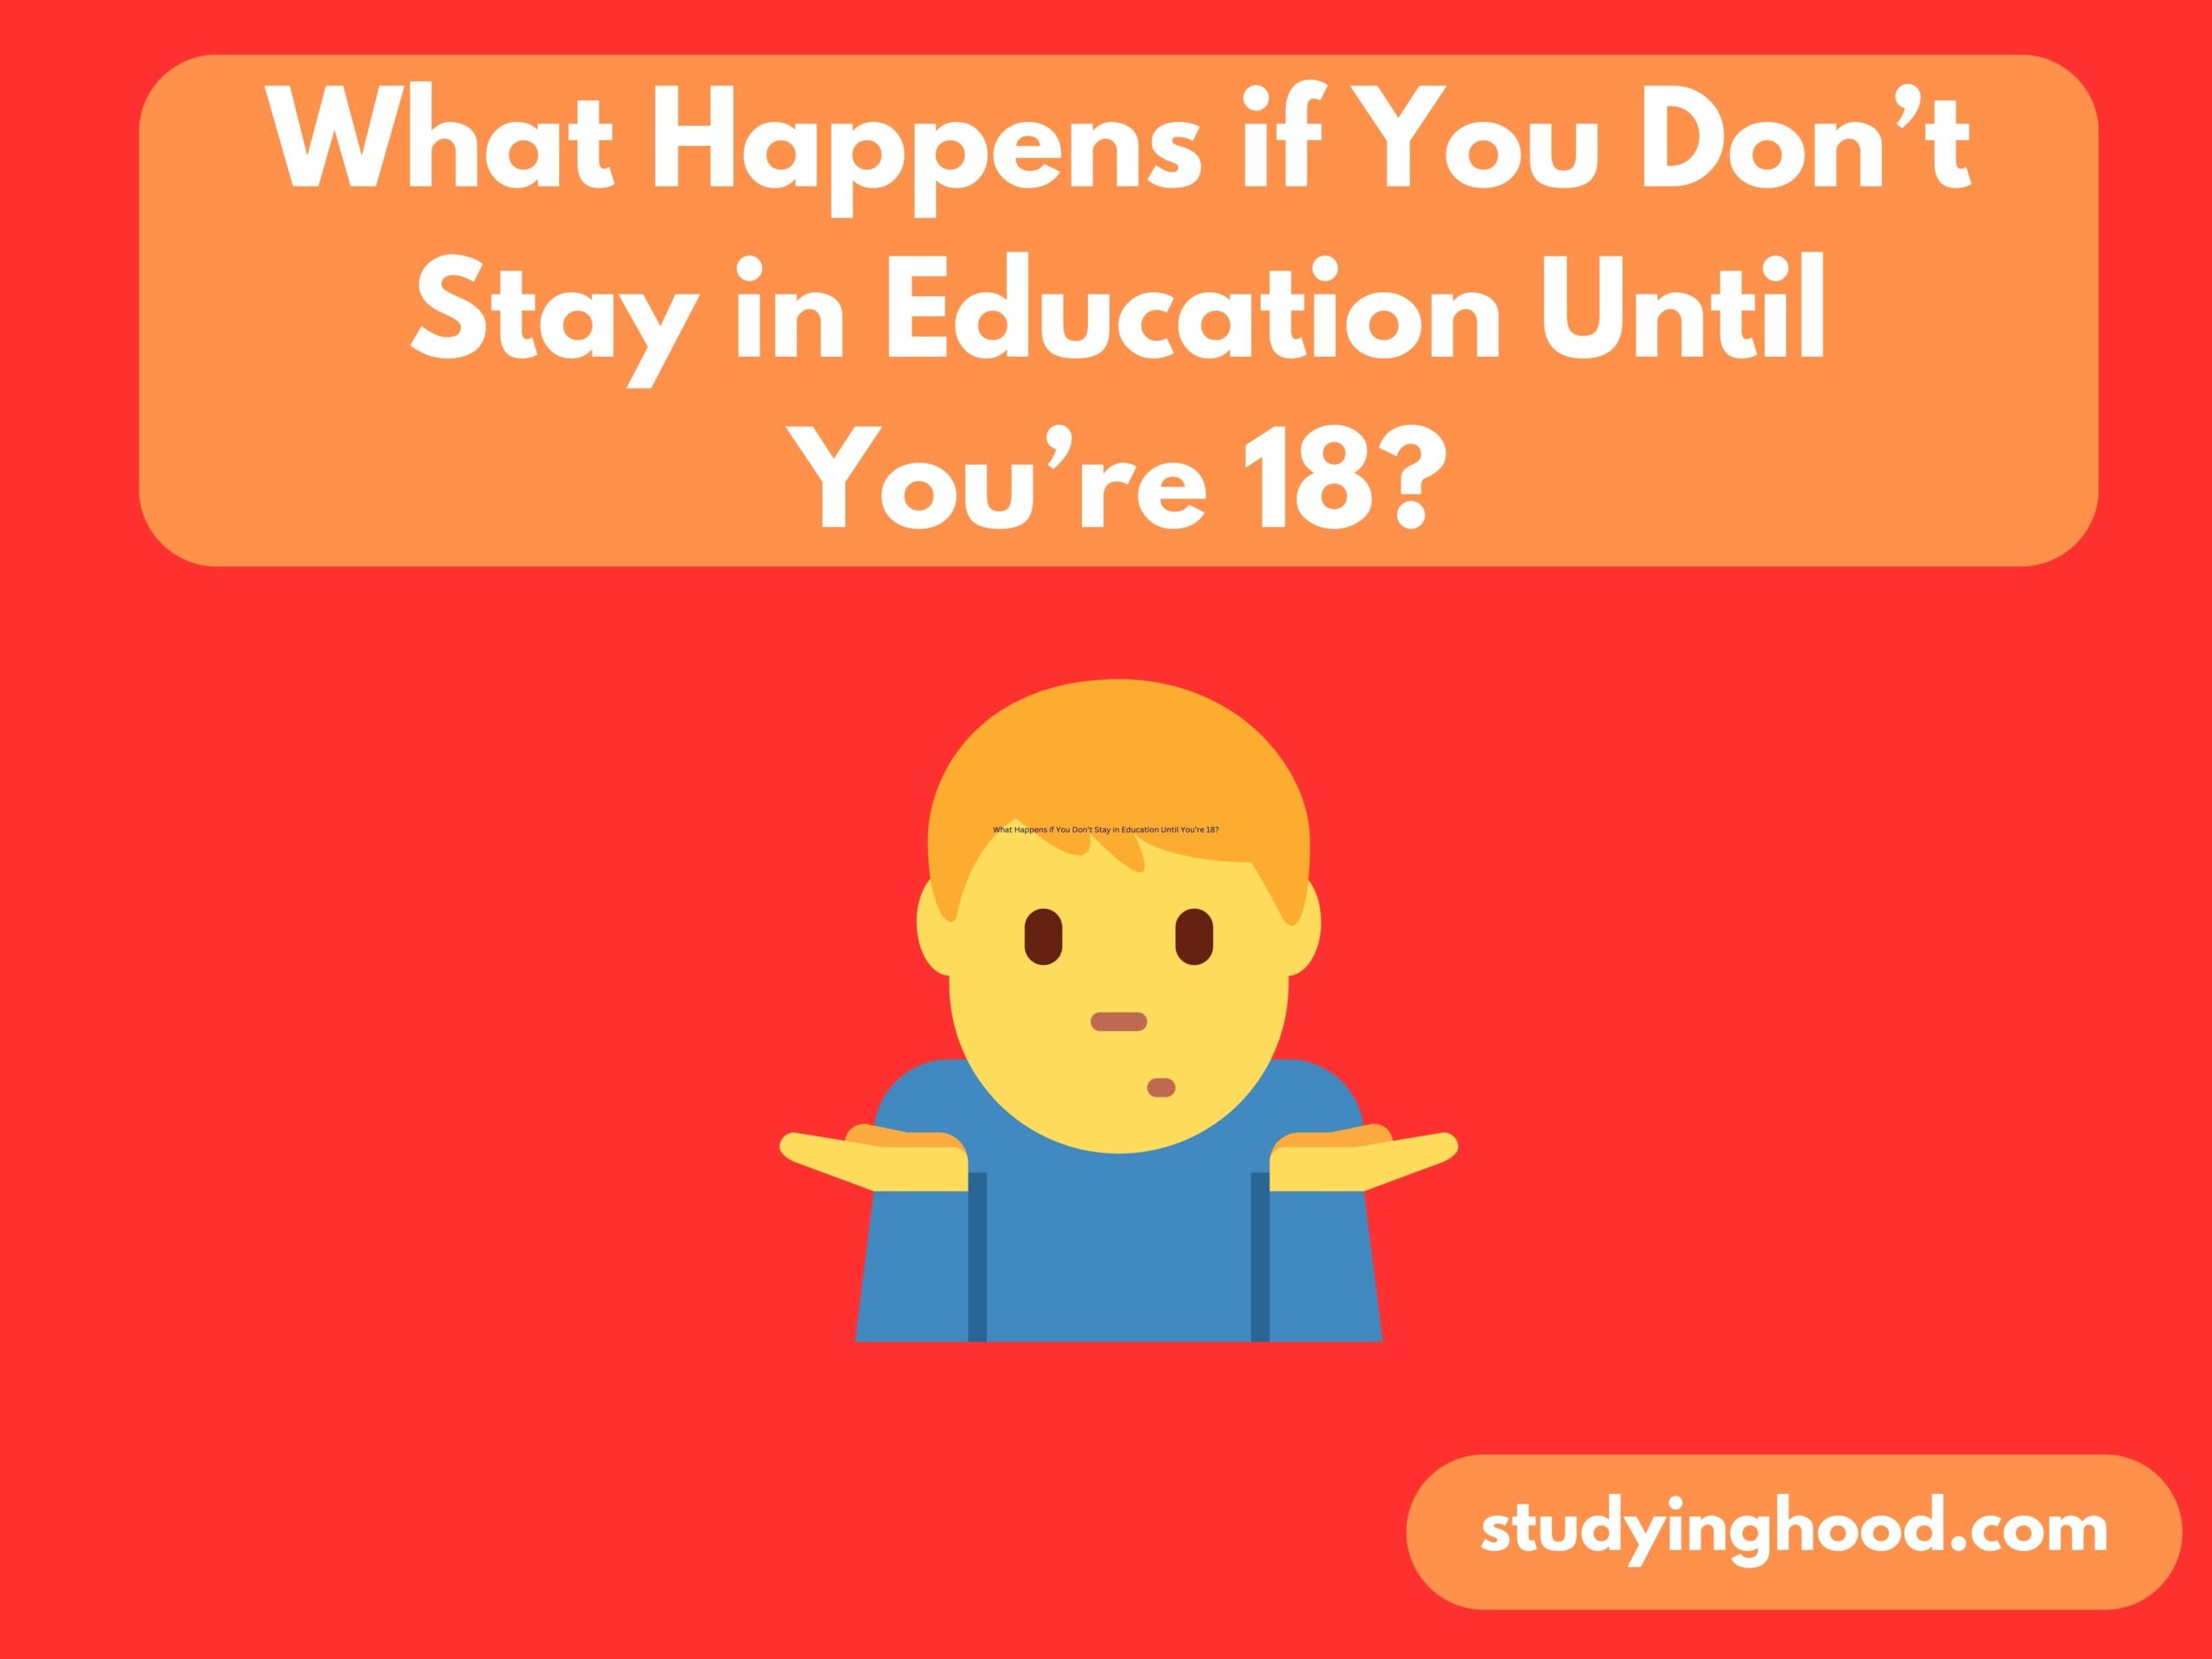 What Happens if You Don’t Stay in Education Until You’re 18